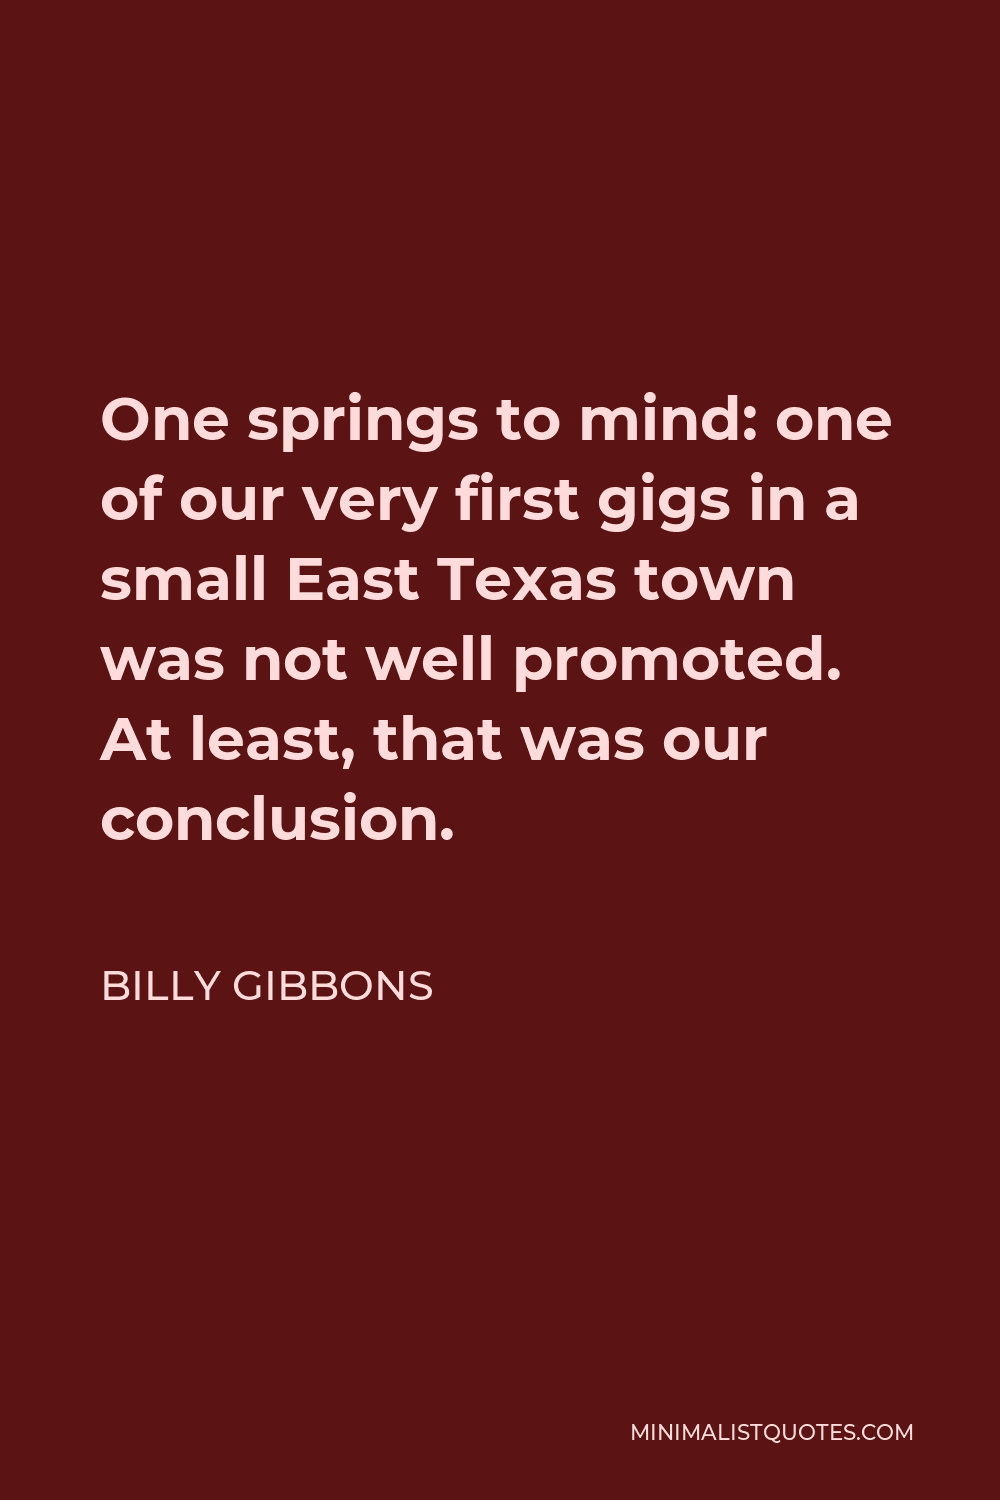 Billy Gibbons Quote - One springs to mind: one of our very first gigs in a small East Texas town was not well promoted. At least, that was our conclusion.